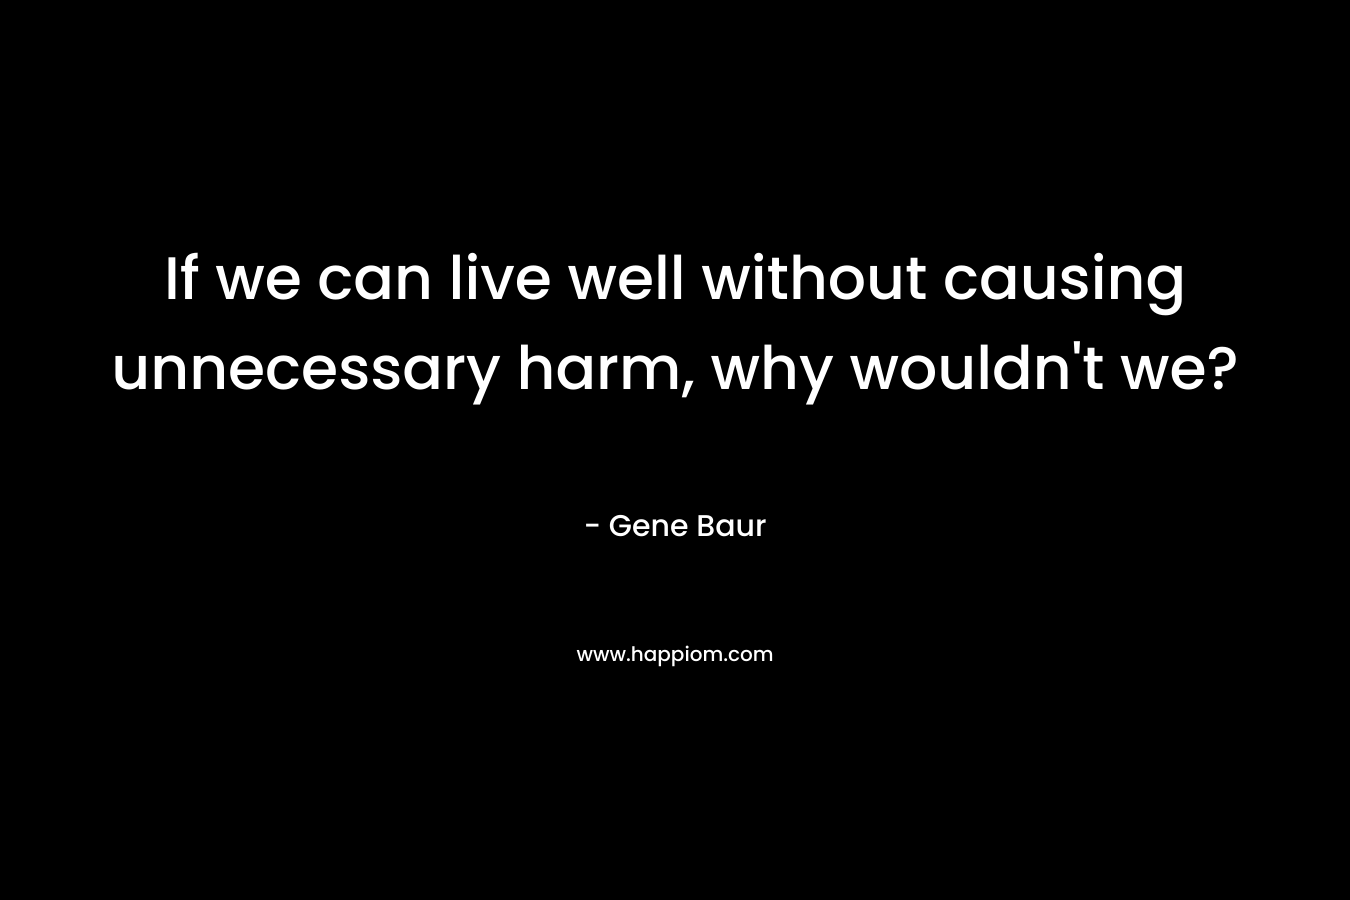 If we can live well without causing unnecessary harm, why wouldn't we?